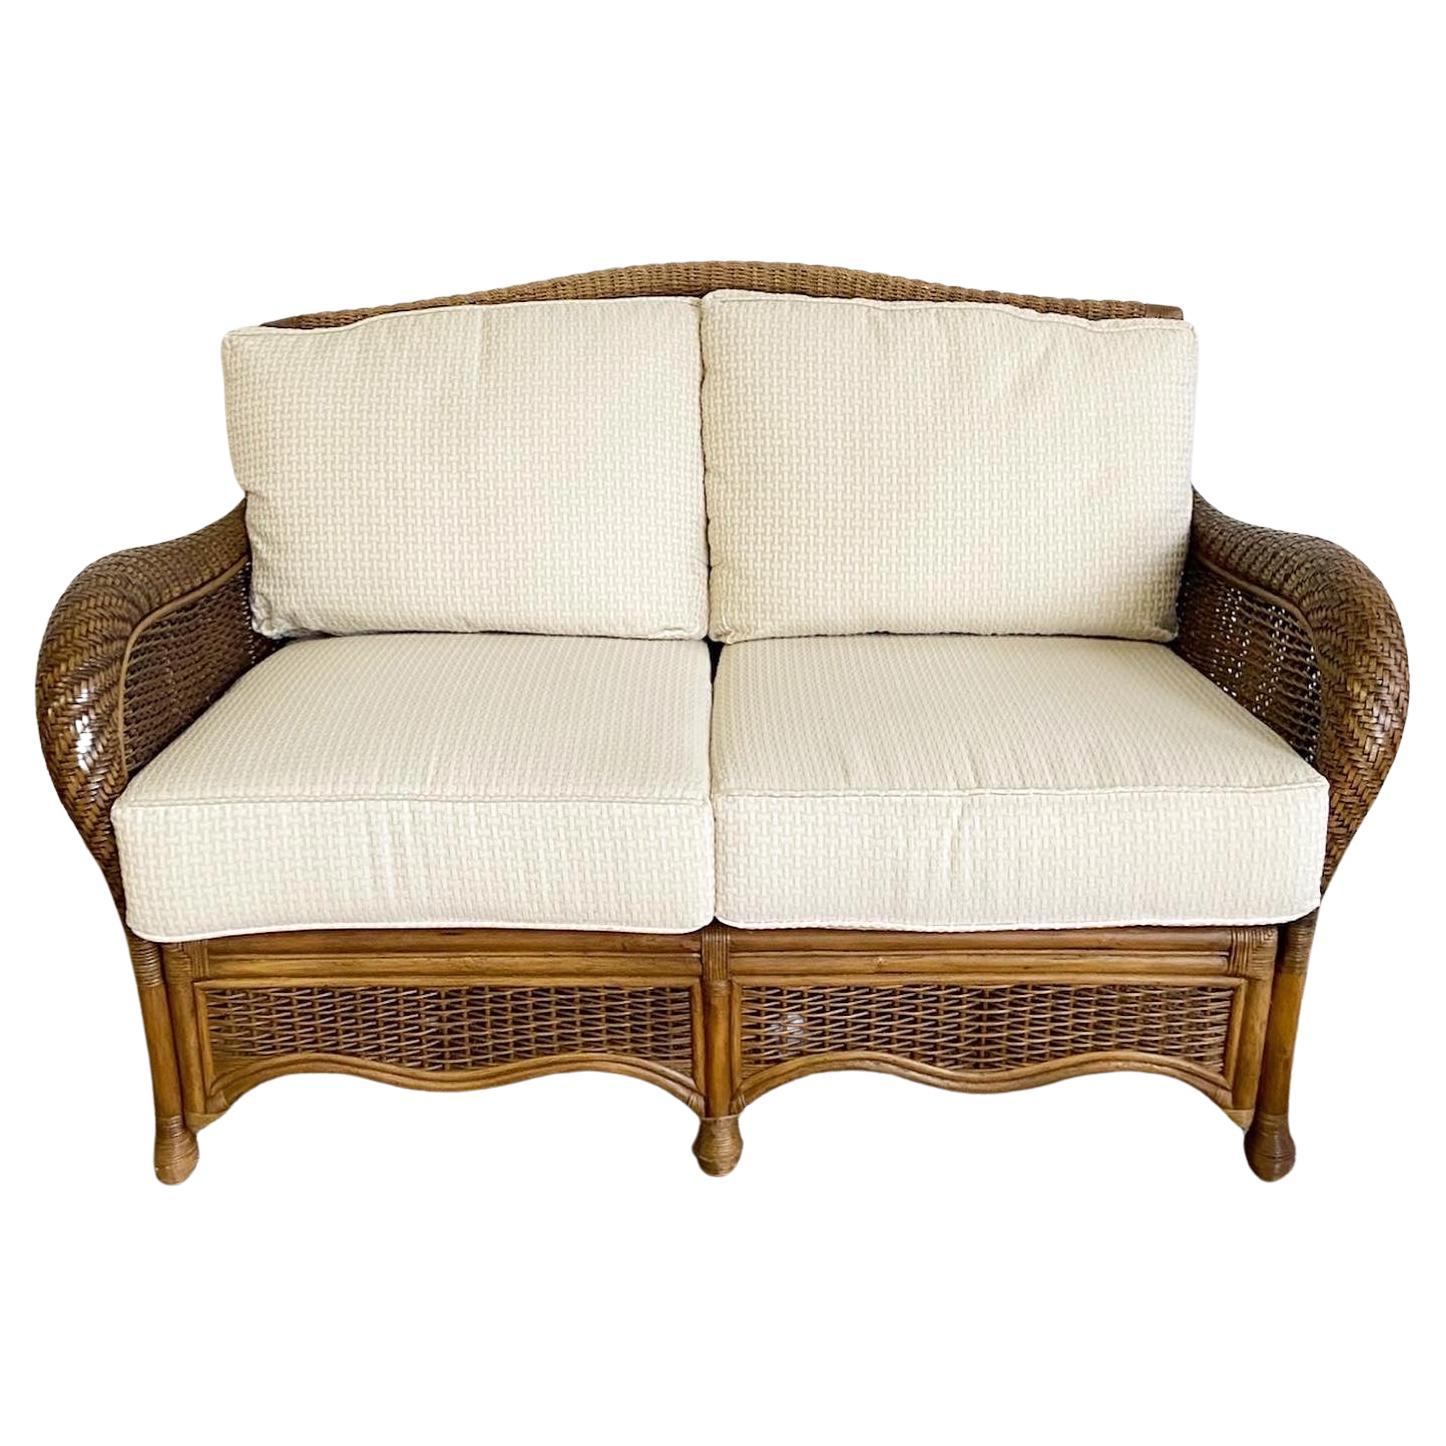 Boho Chic Bamboo Rattan Wicker Love Seat With Cushions For Sale